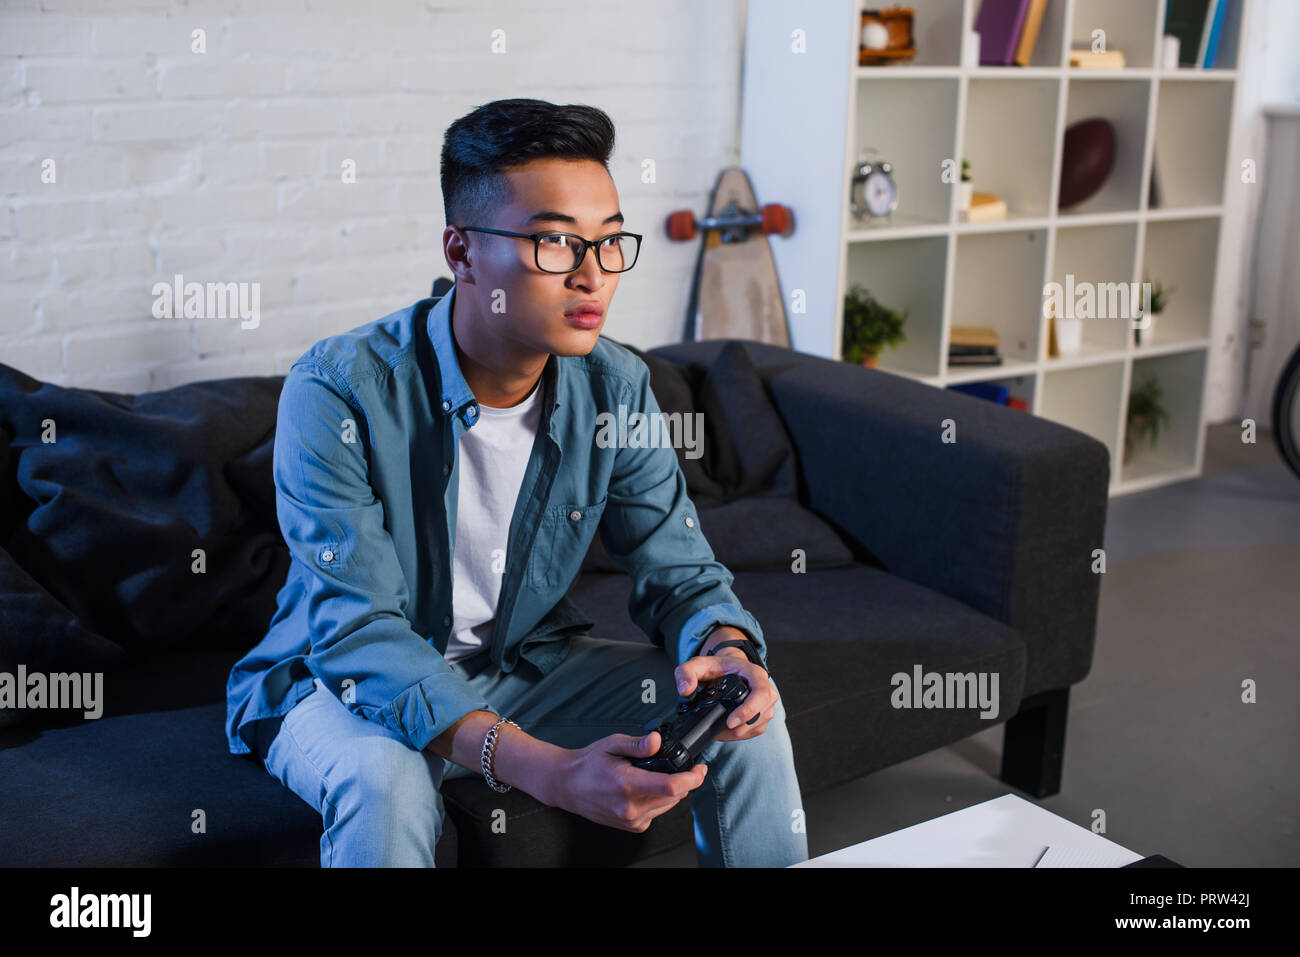 focused young asian man playing video game with joystick at home Stock Photo